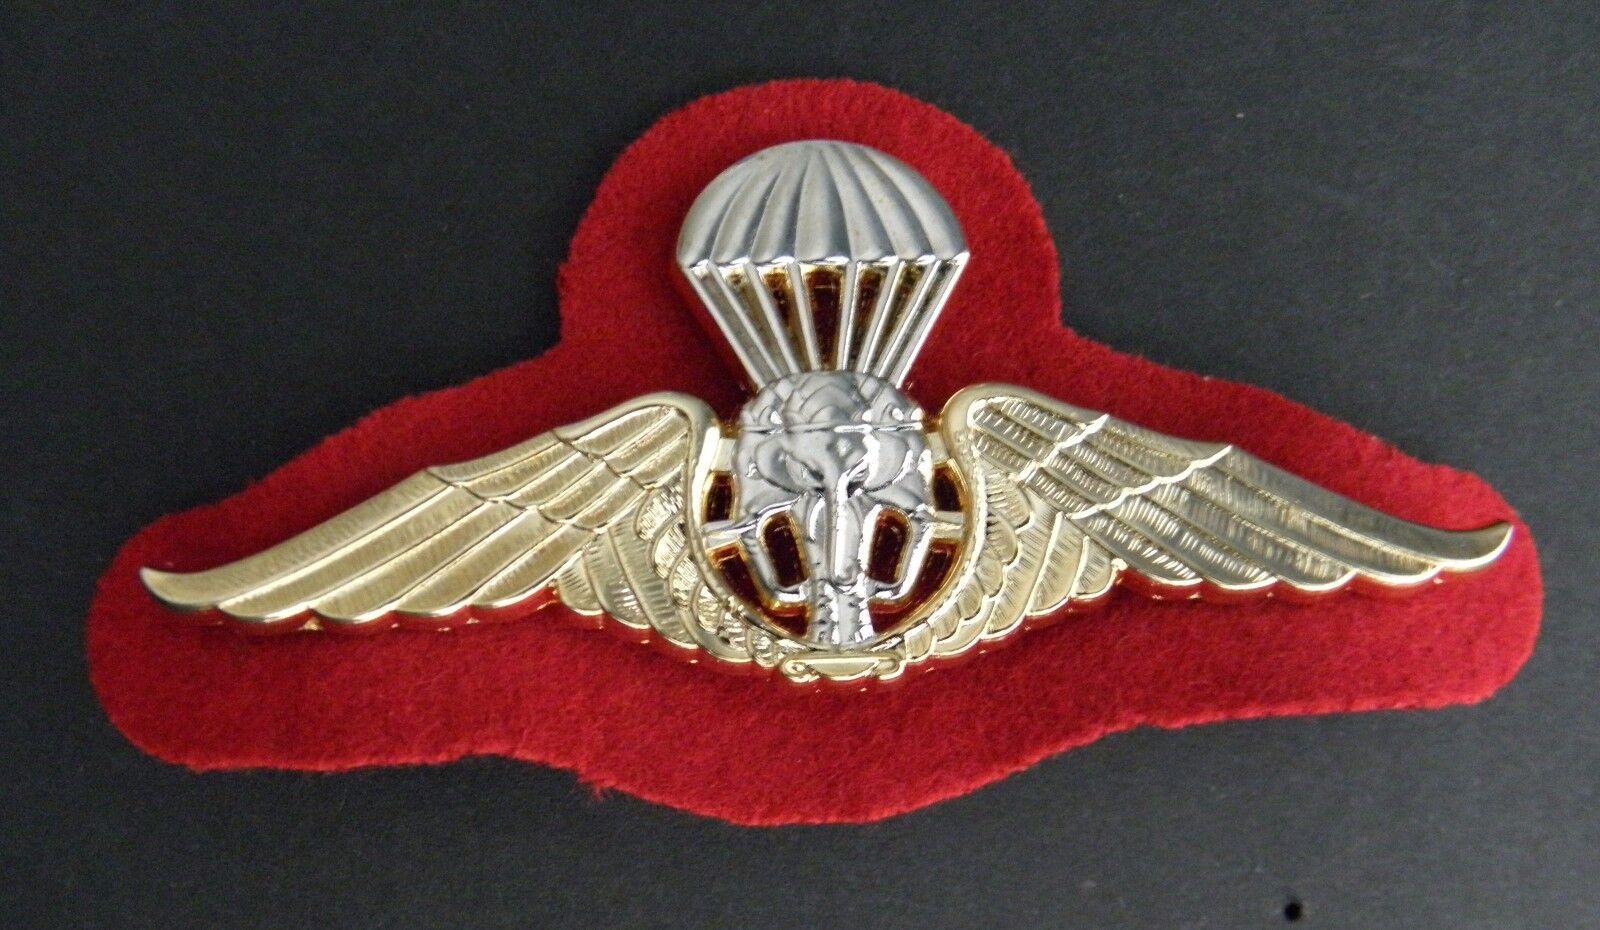 THAILAND PARATROOPER JUMP WINGS JACKET HAT PIN BADGE 3.75 INCHES THAI